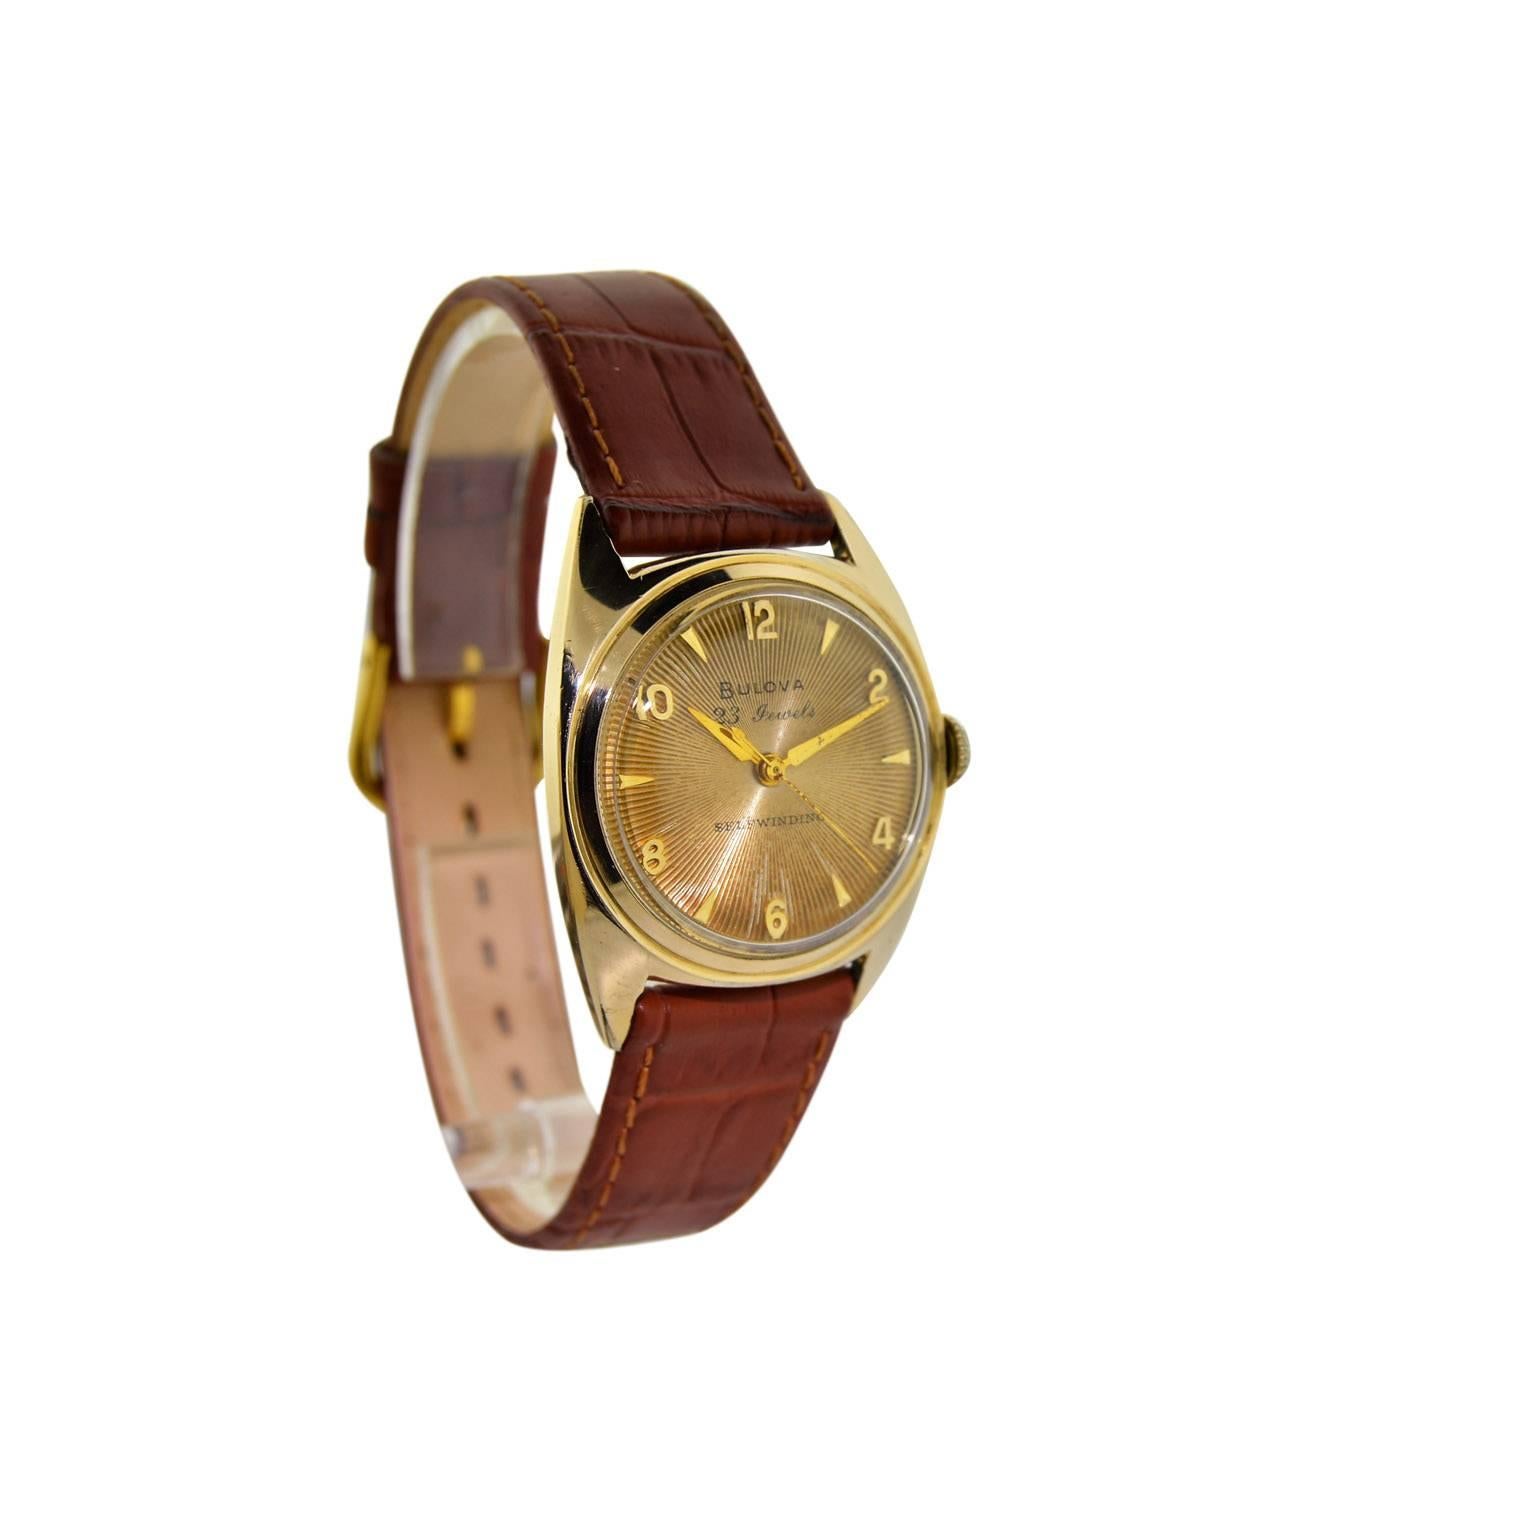 FACTORY / HOUSE: Bulova Watch Company
STYLE / REFERENCE: Art Deco / Round 
METAL / MATERIAL:  Yellow Gold Filled
DIMENSIONS:  39 mm X 32 mm
CIRCA: 1950
MOVEMENT / CALIBER: Automatic Winding / 23 Jewels 
DIAL / HANDS: Original Patinated Dial / Gilt